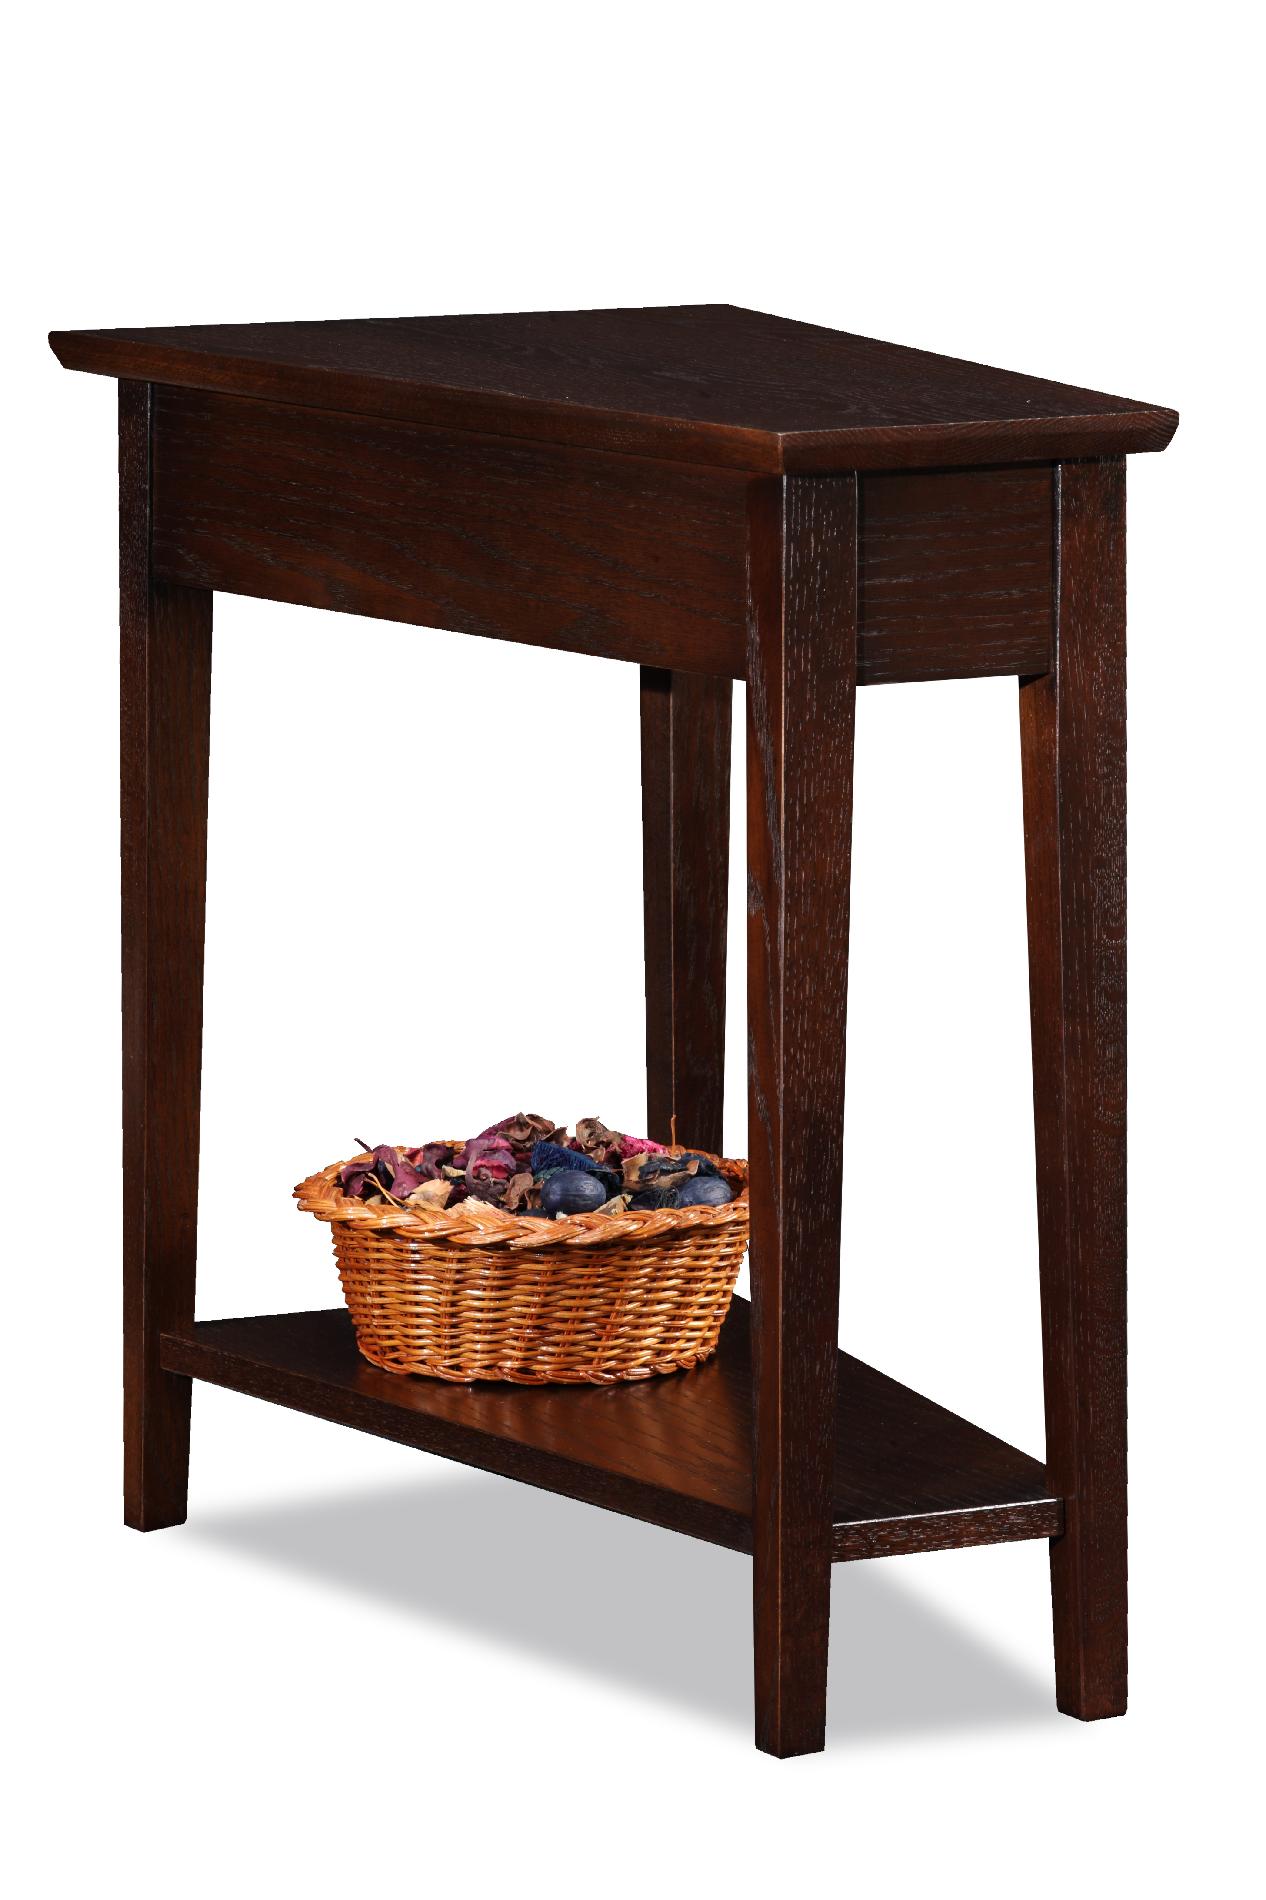 Leick Recliner Wedge End Table - Chocolate Oak